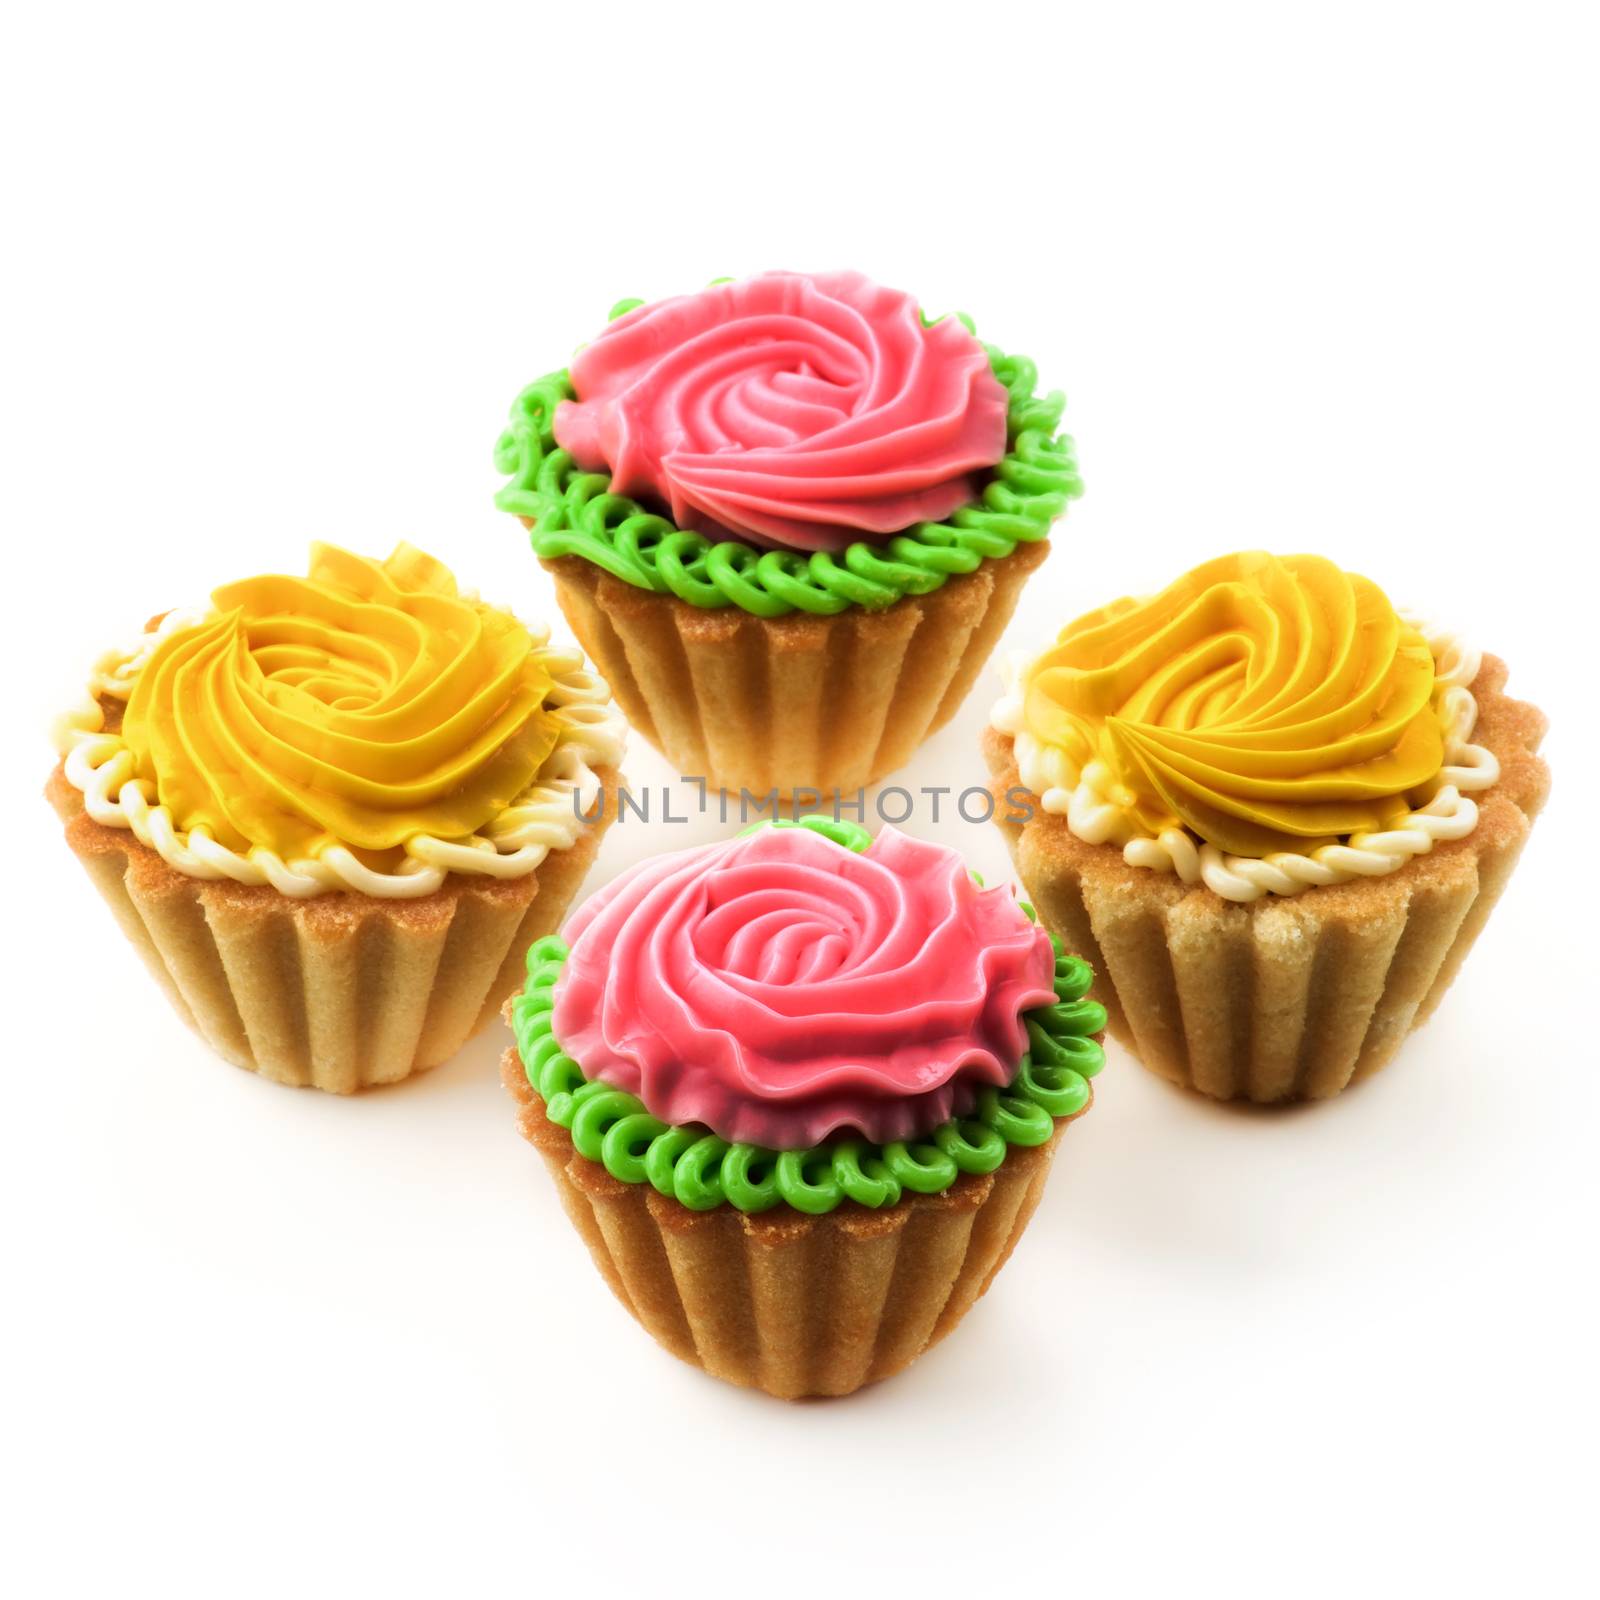 Arrangement of Delicious Little Tarts with Colored Butter Cream and Decoration closeup on White background